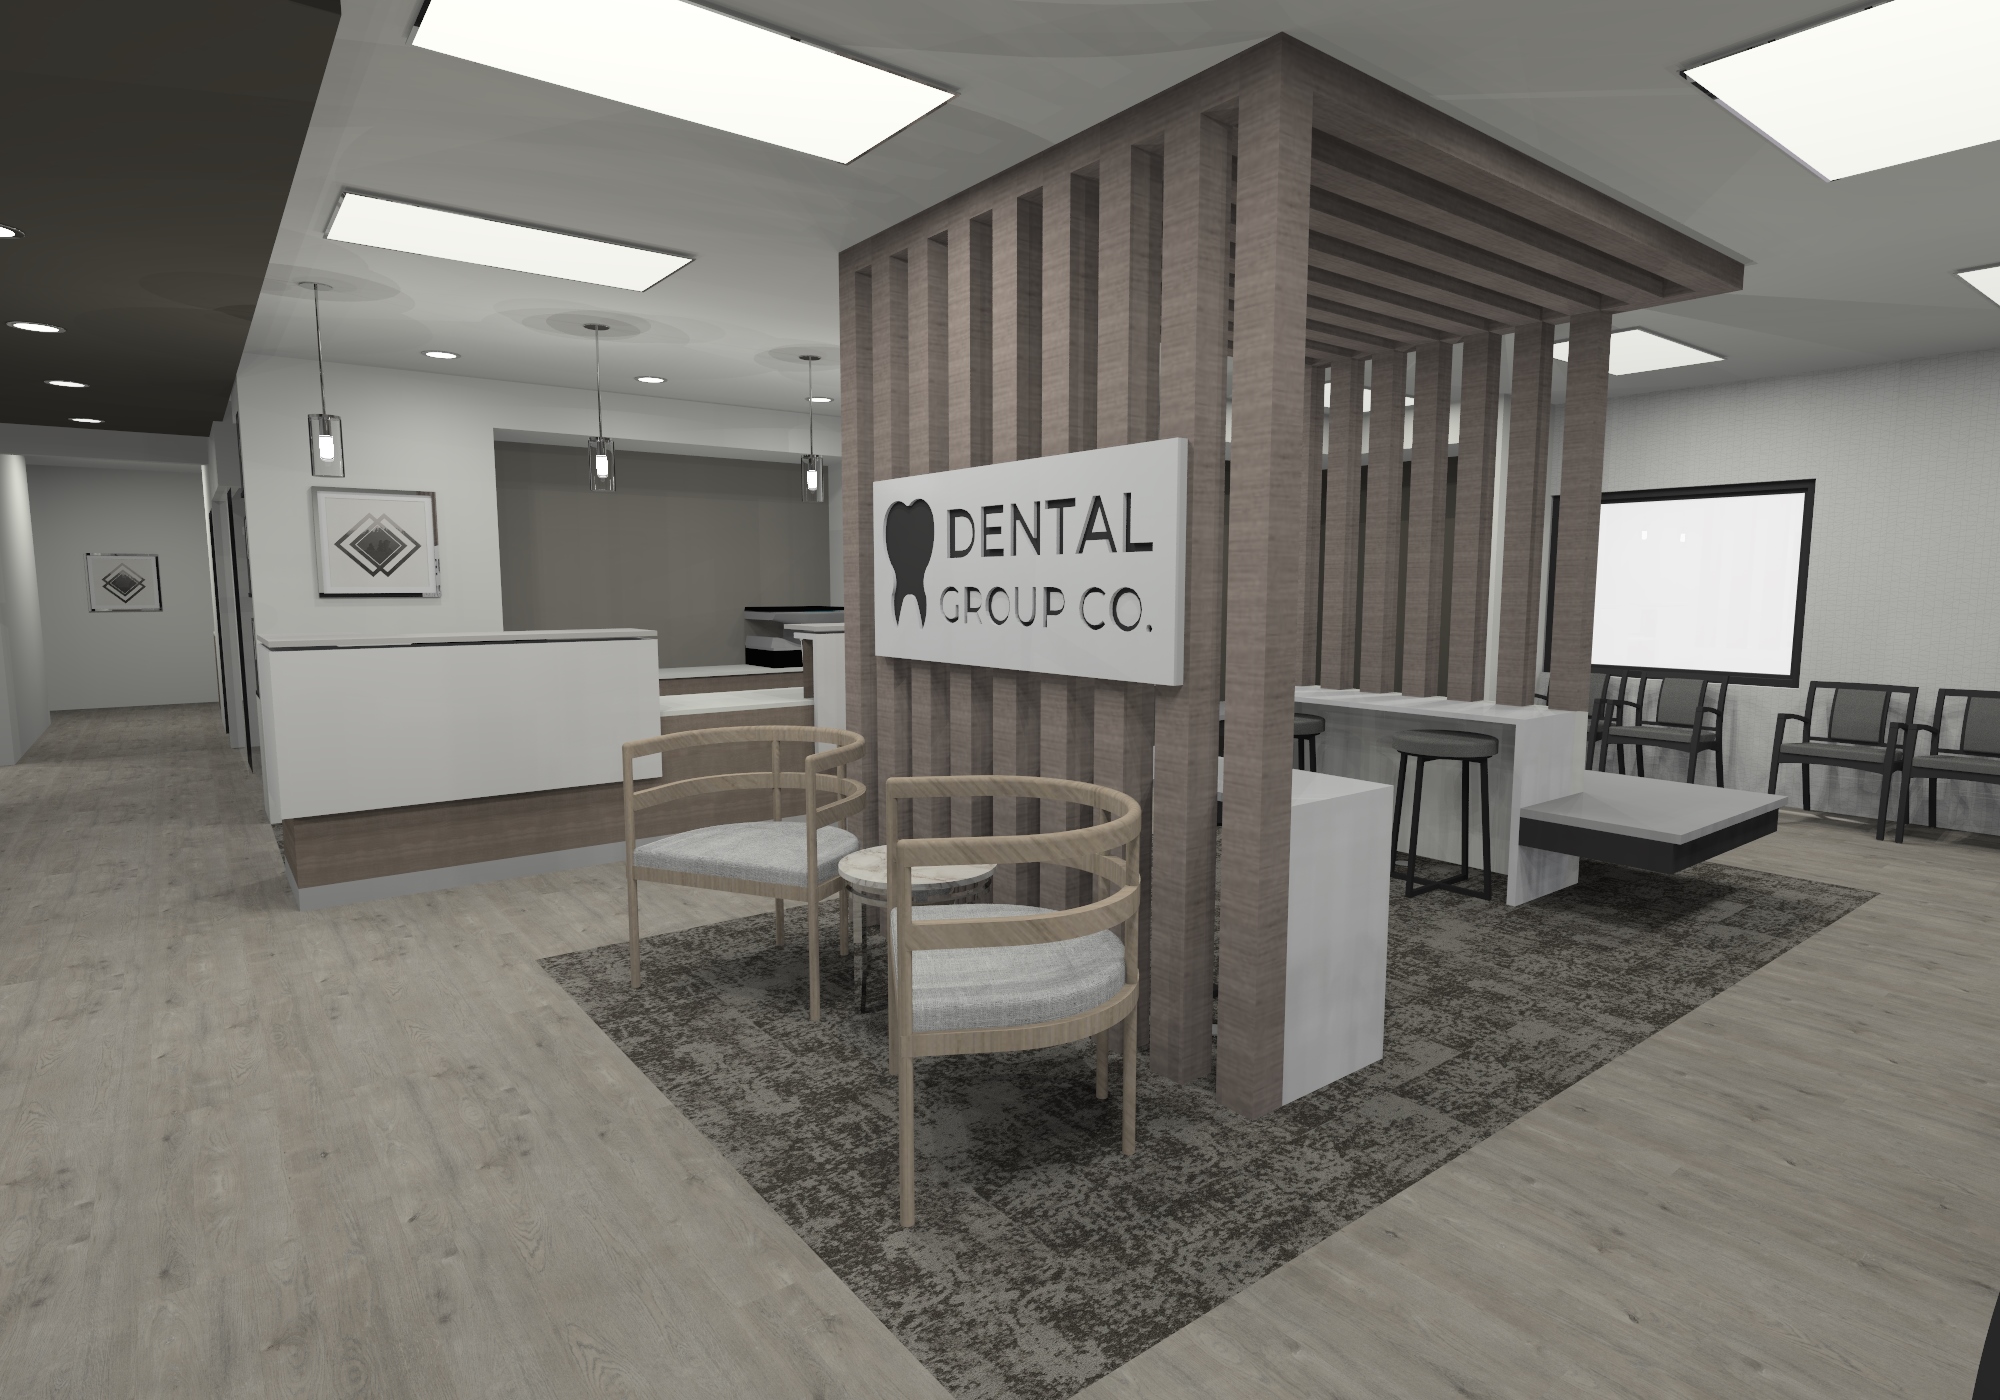 Environmental render of the practice entry way including logo wall.